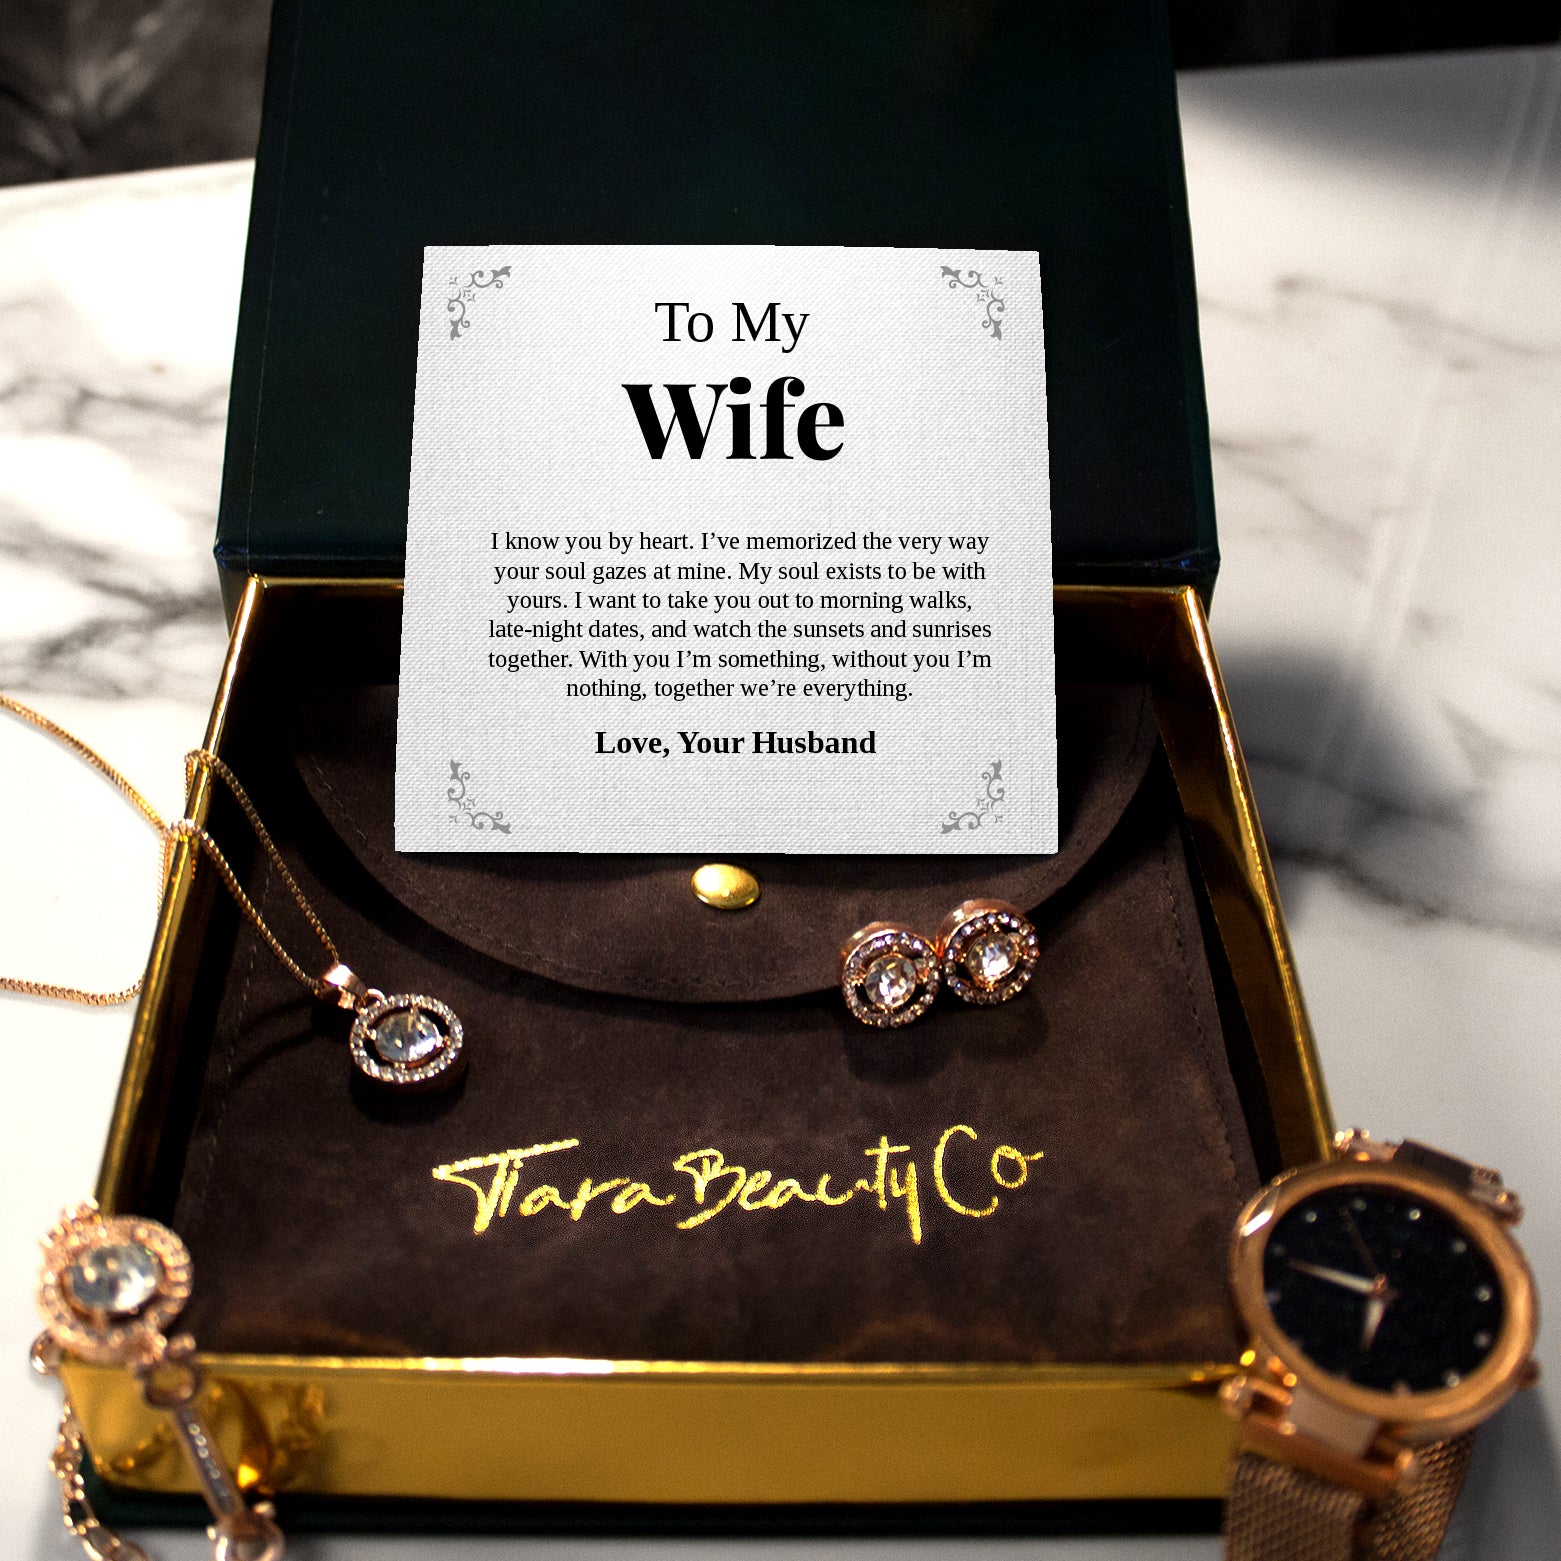 To My Wife | "By Heart" | Cosmopolitan Set